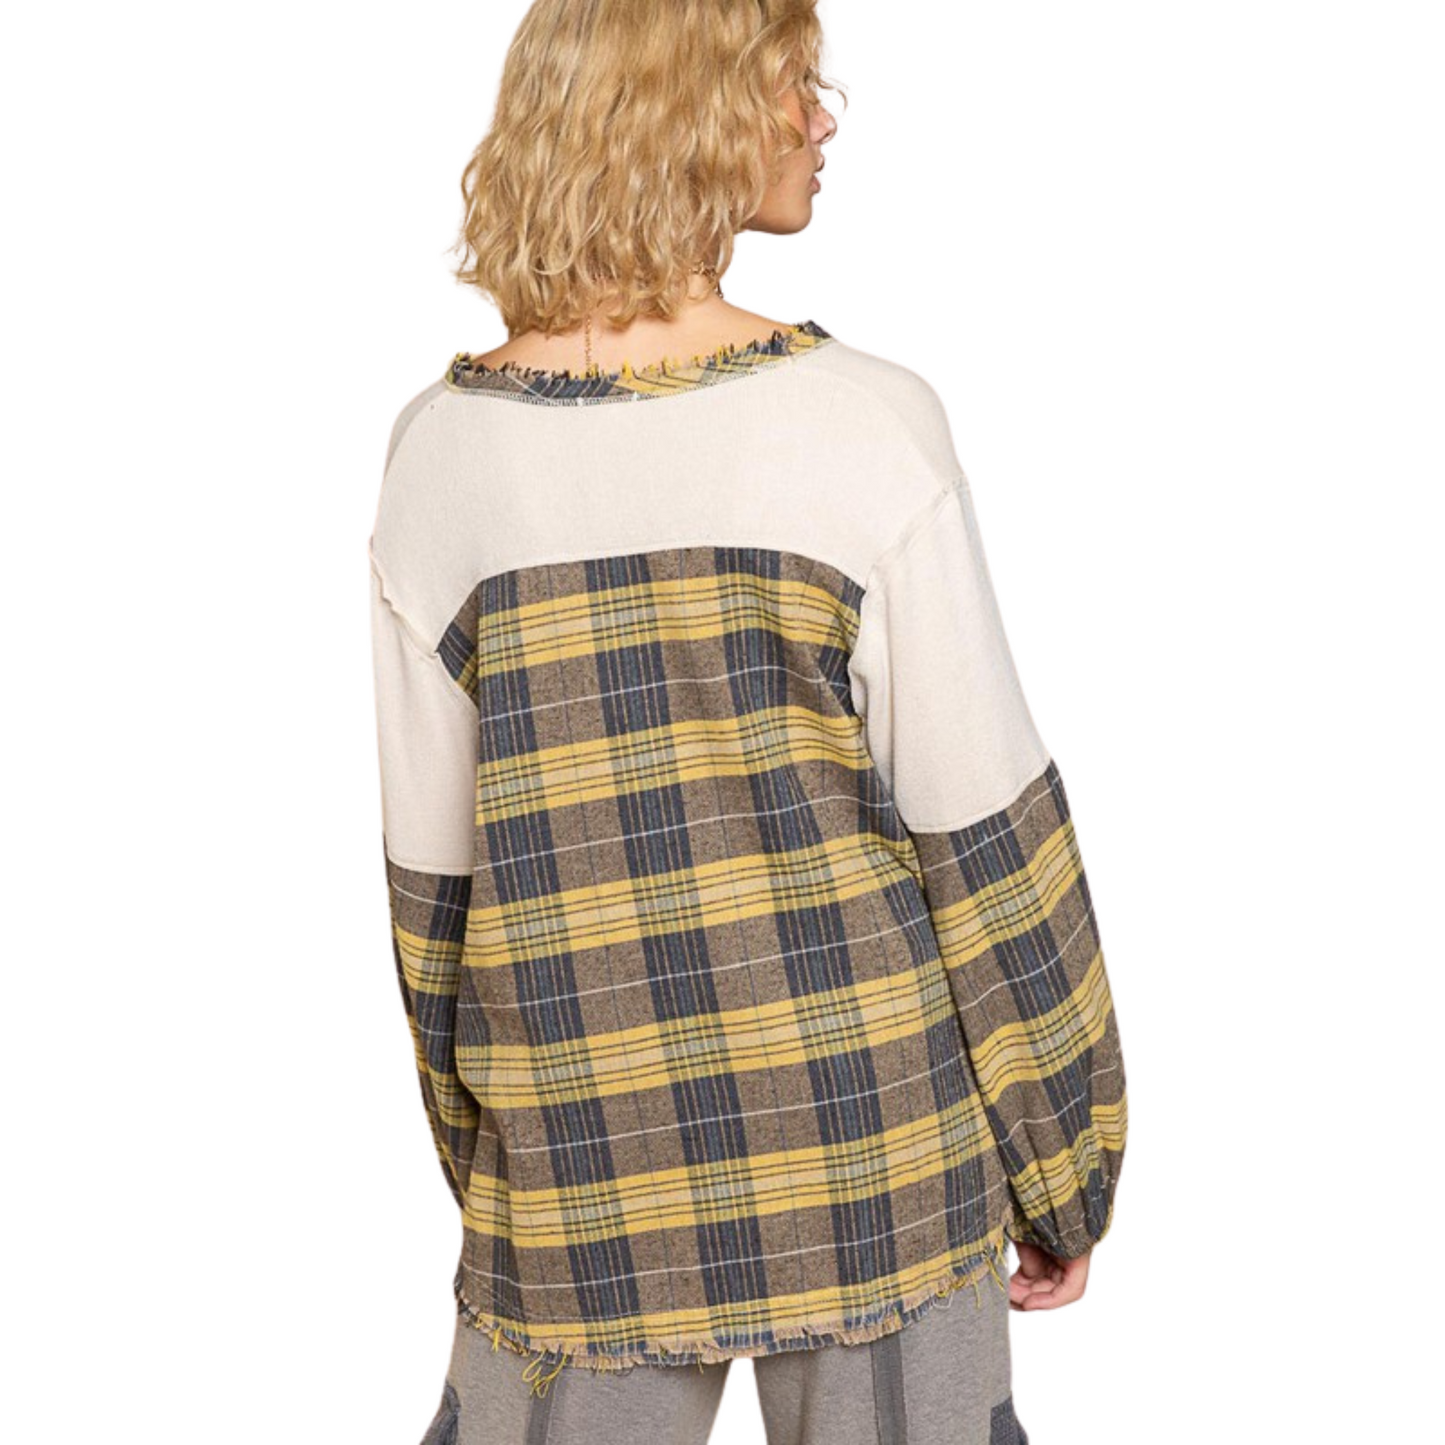 This Plaid Sleeve Pocket Top features a classic blue and yellow plaid on the sleeves and a creamy ivory color on the body. It's made of breathable fabric, ensuring a comfortable fit that's perfect for everyday wear. The pocket adds an extra touch of style that makes this top great for both casual and dressy occasions.